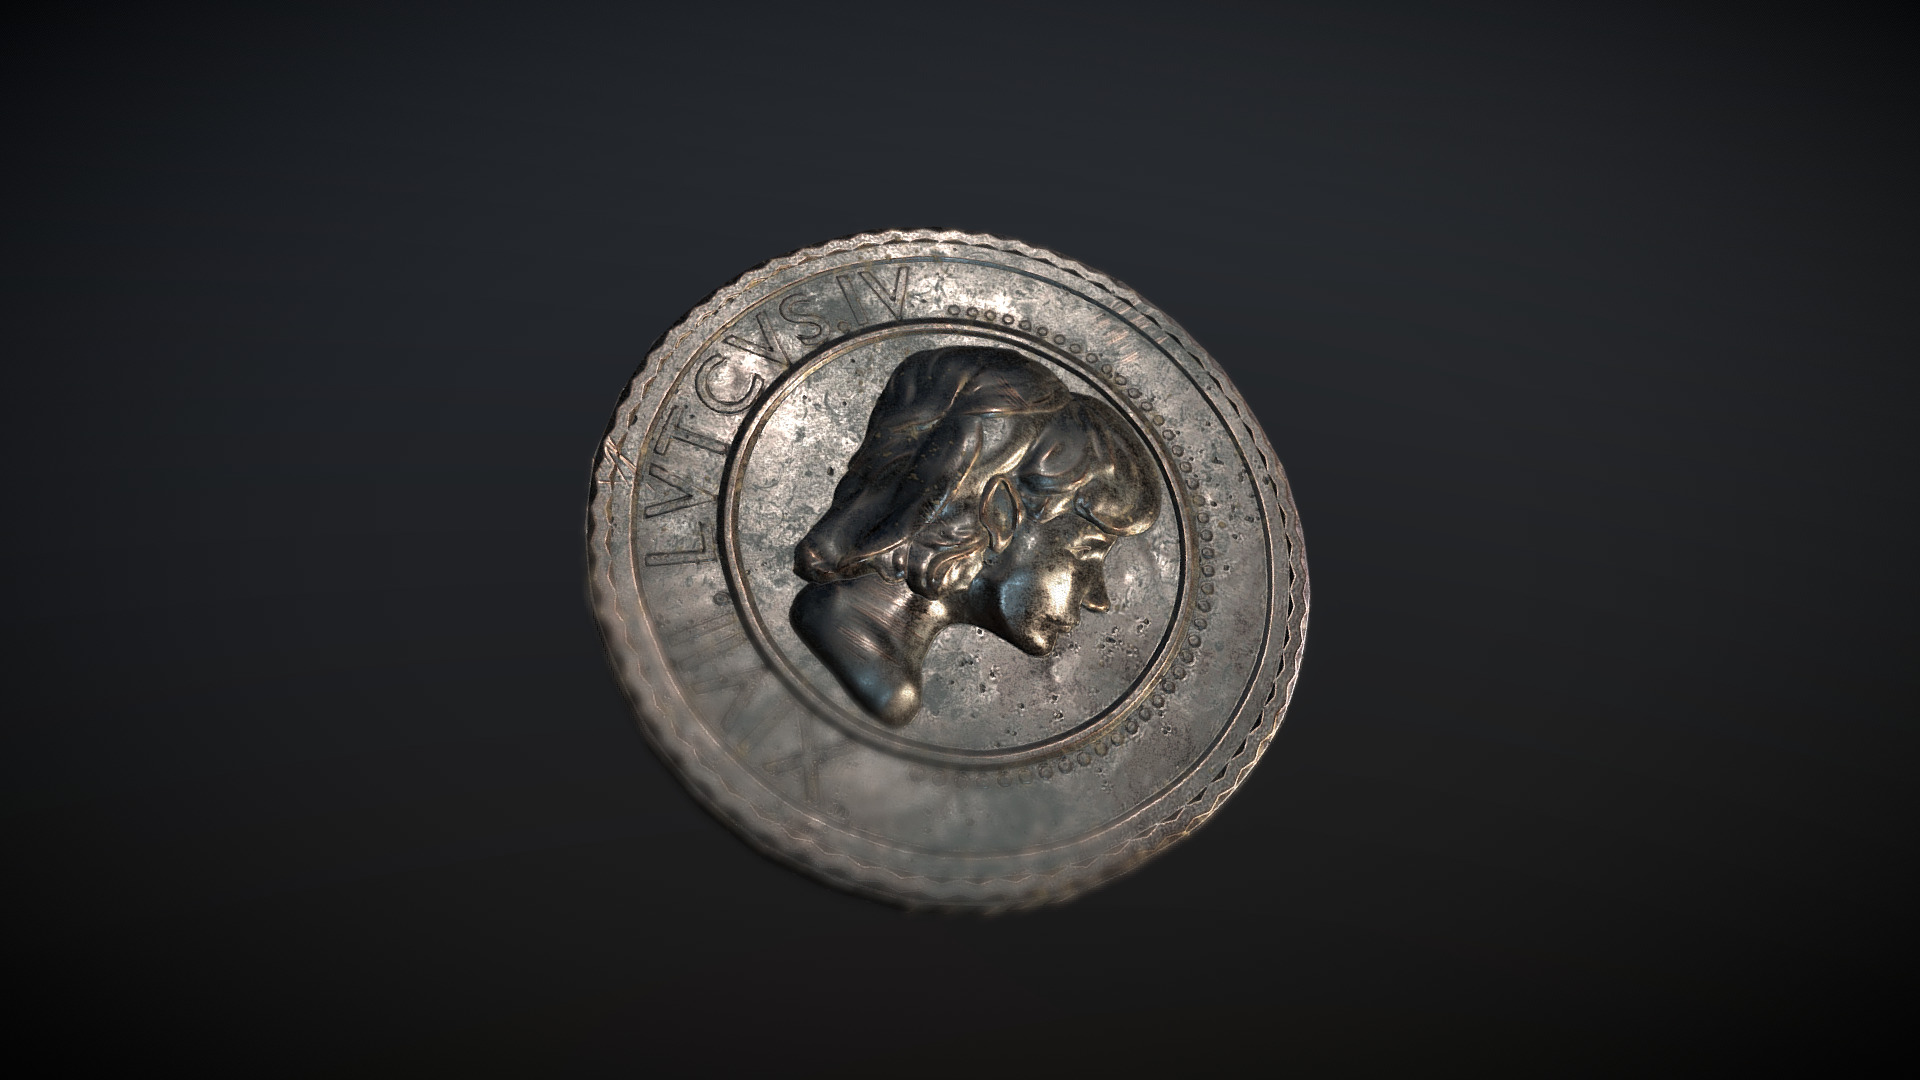 3D model Coin lowpoly game asset - This is a 3D model of the Coin lowpoly game asset. The 3D model is about a silver coin with a face on it.